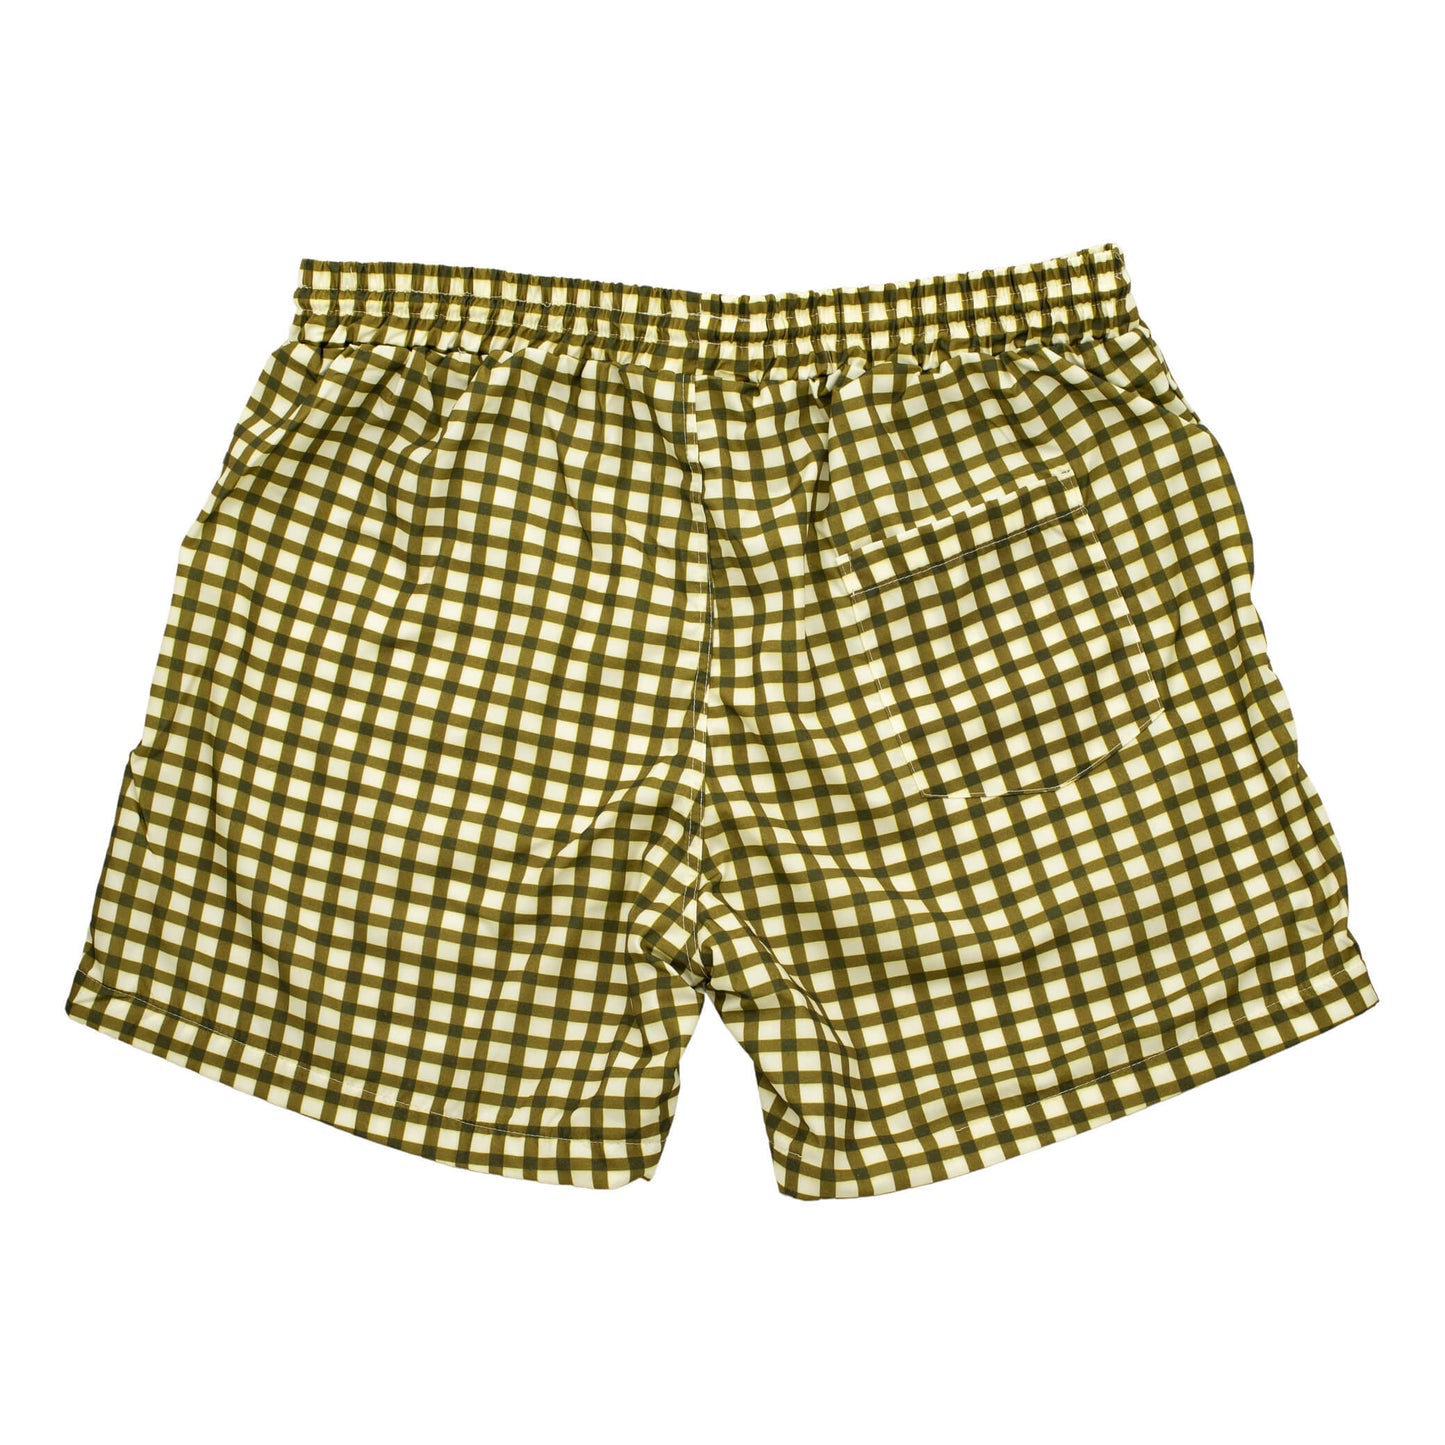 Vibrant Hounds Green checkered swim shorts. This is back flat lay and the swimwear is green and cream gingham.